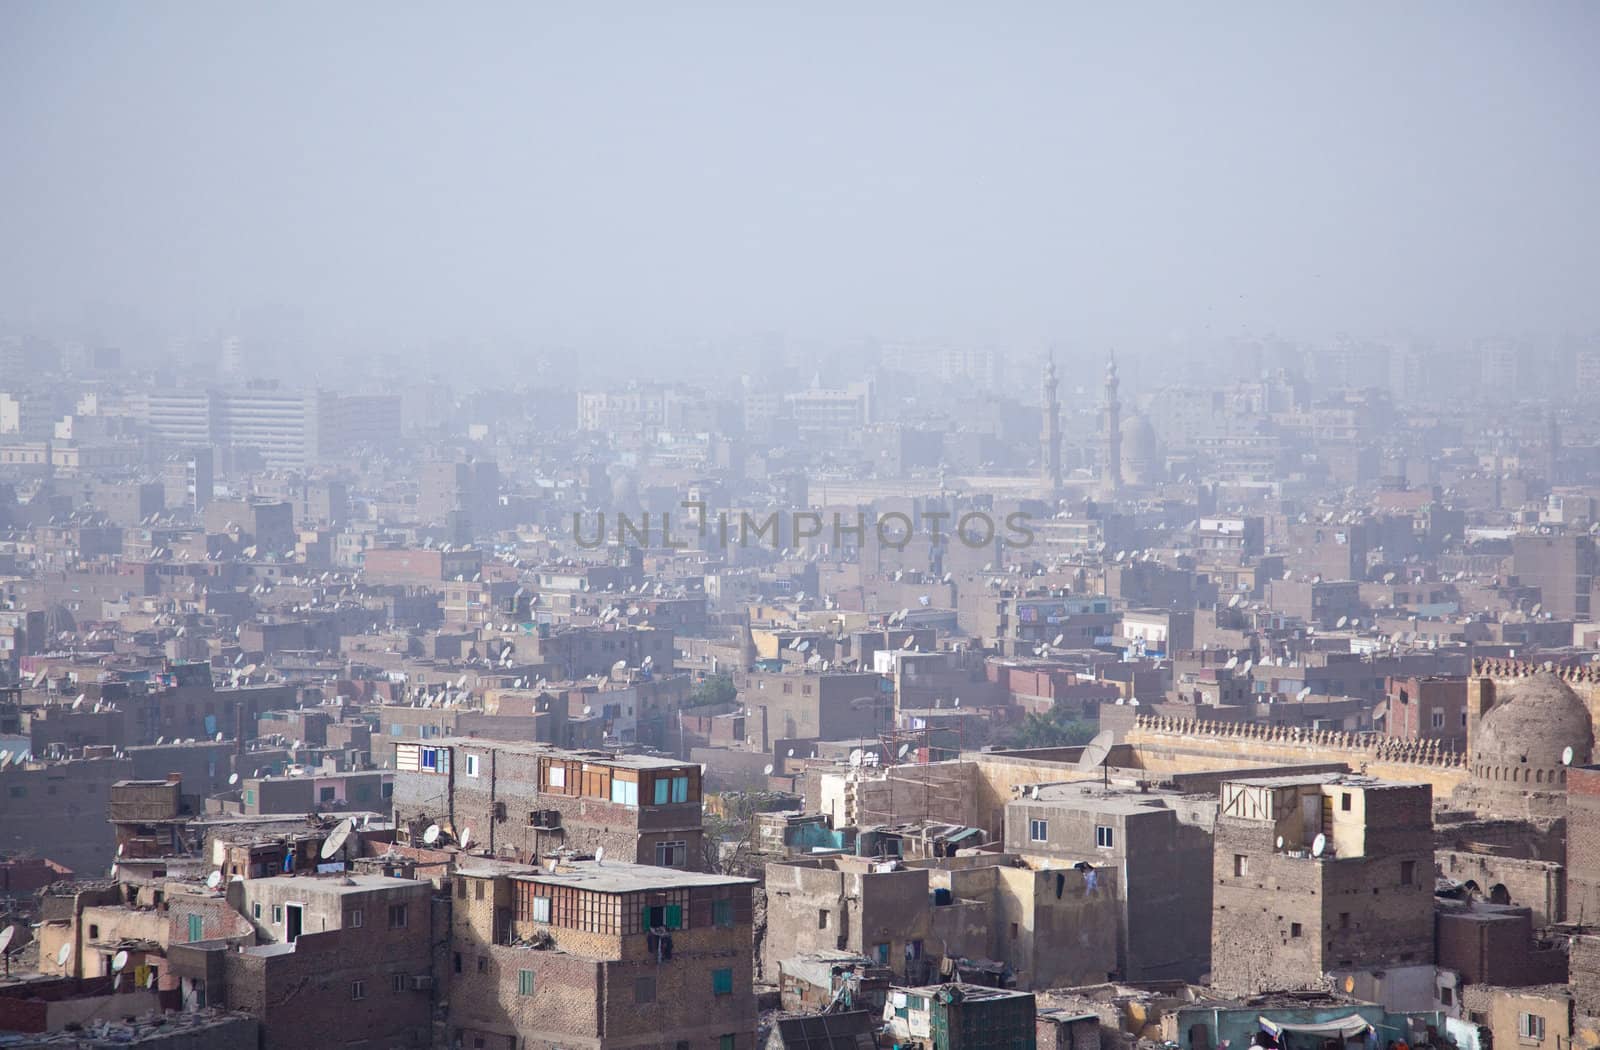 View over smoggy slums of Cairo by steheap